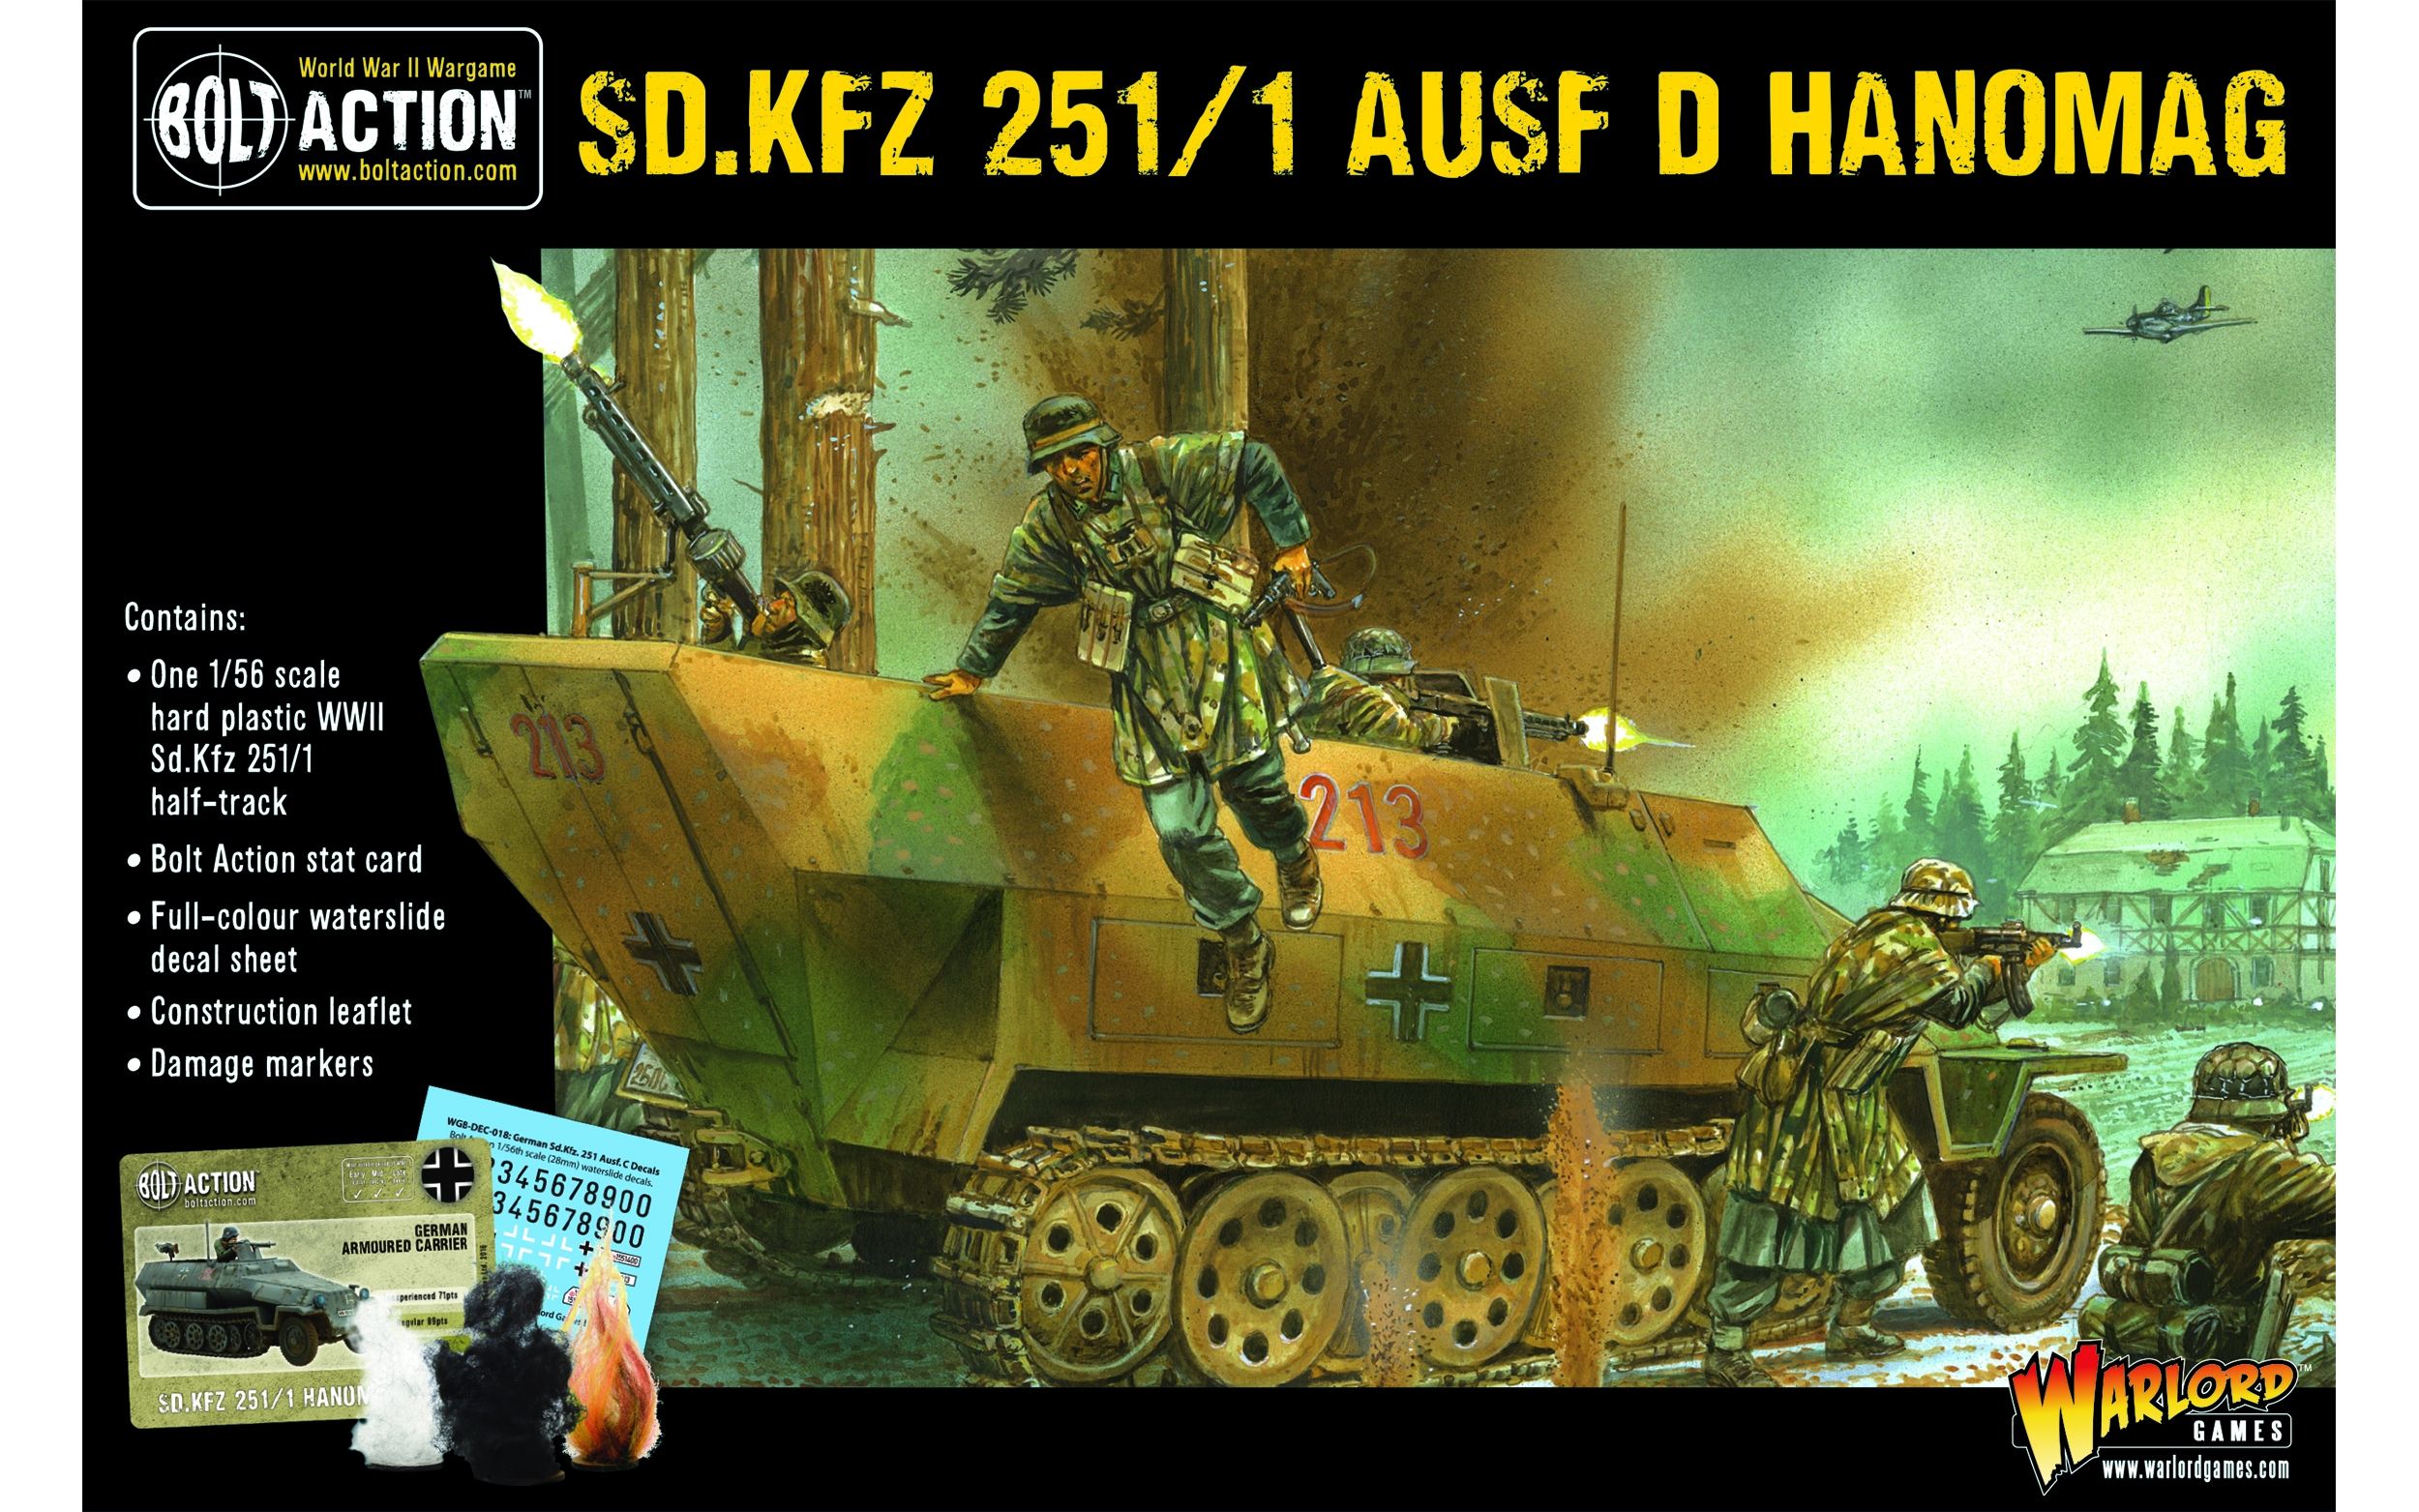 Produkt archiwalny] Sd.Kfz. 251/1 Ausf. A - Limited Edition - WW2  Historical Collection - for kids 10